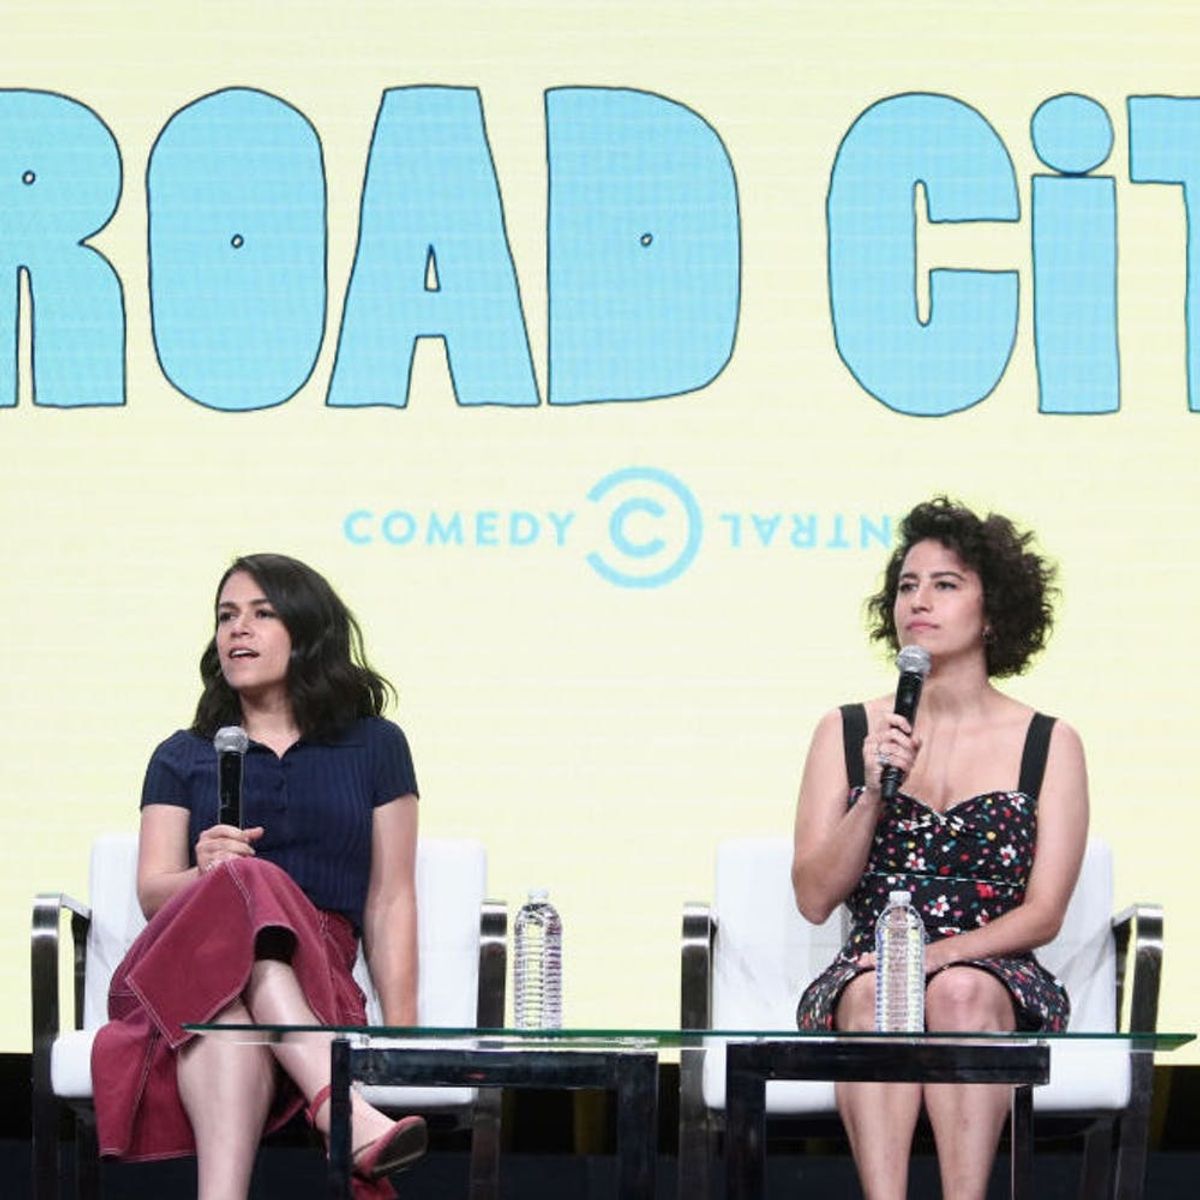 Broad City’s Abbi Jacobson and Ilana Glazer “Are Talking About the Life of the Series”